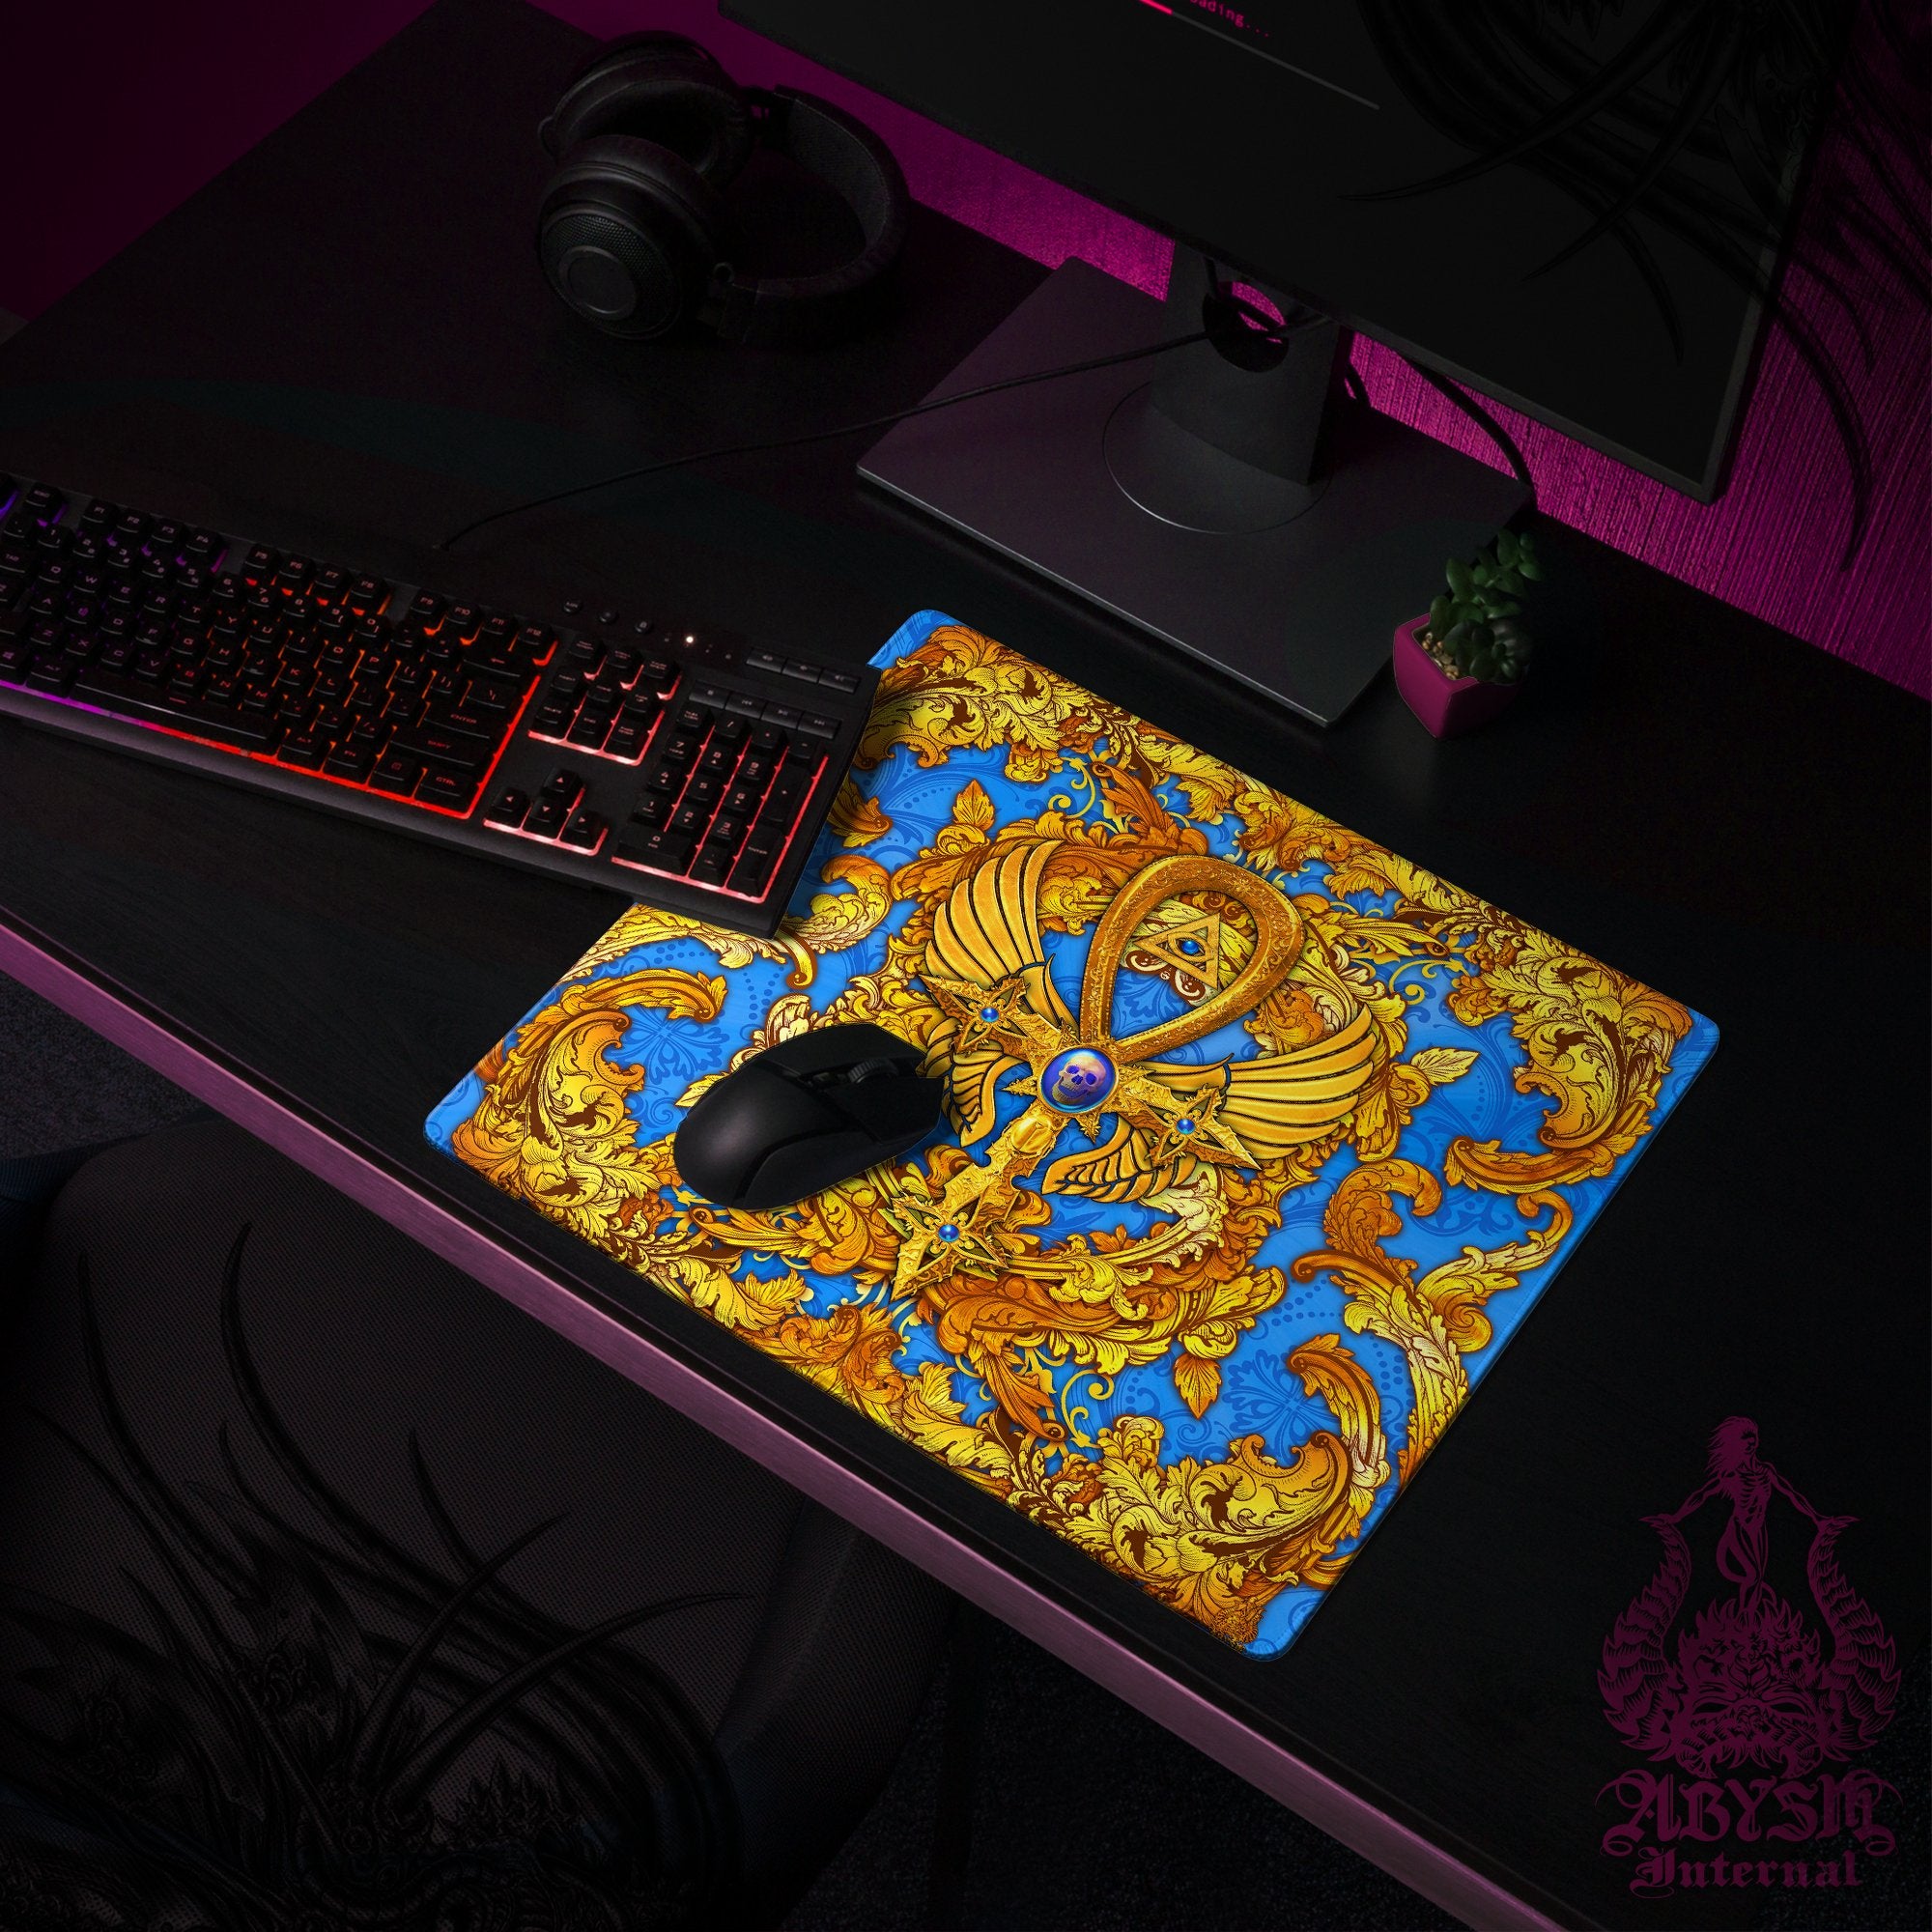 Ankh Mouse Pad, Gold Cross Gaming Desk Mat, Occult Workpad, Cyan Gold Table Protector Cover, Art Print - Abysm Internal